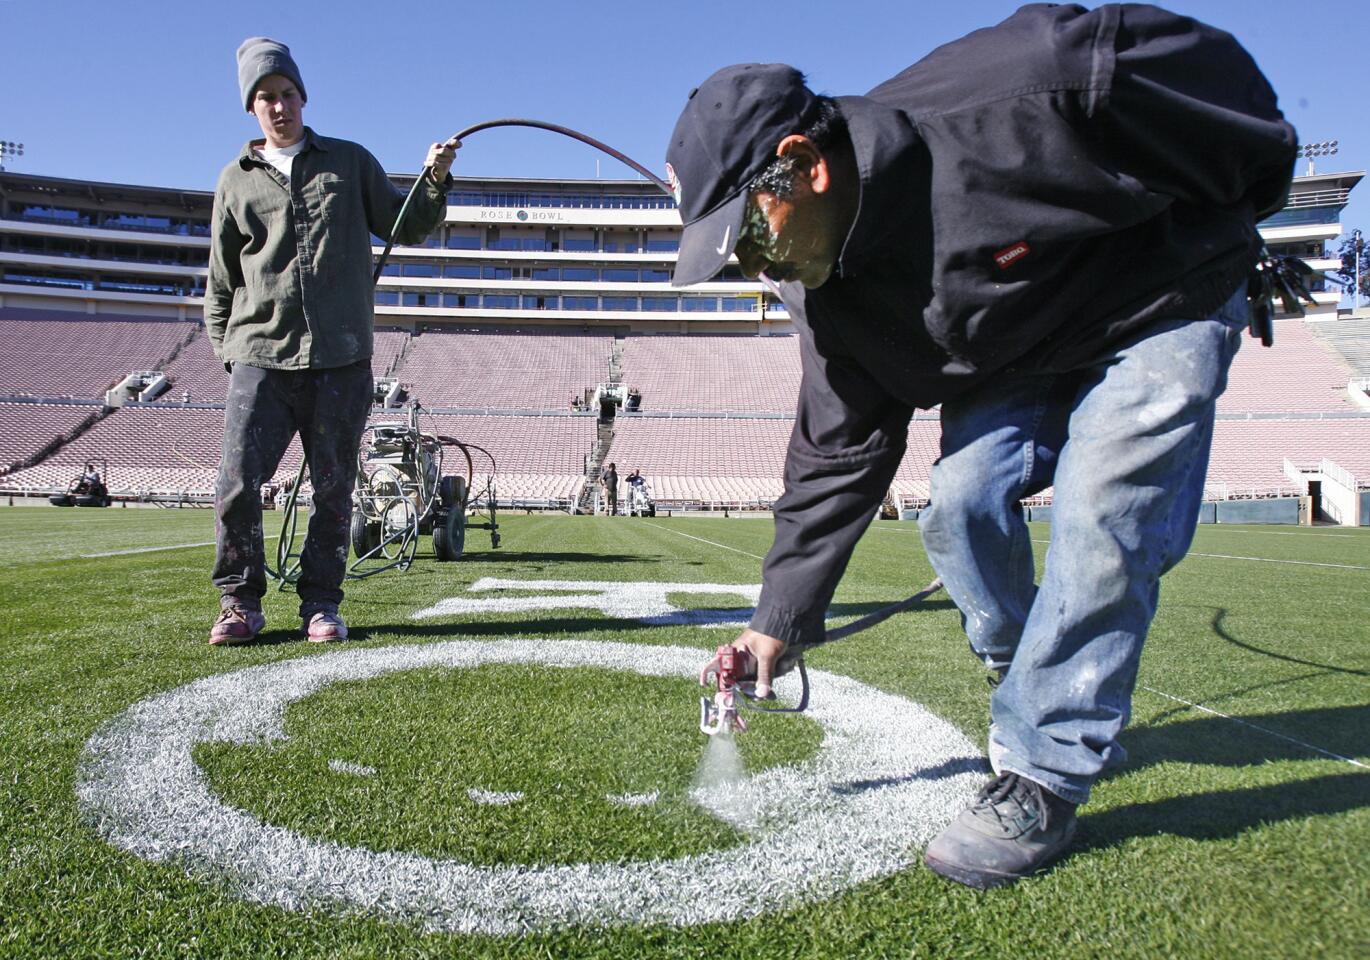 Martin Rodriguez, with the help of Dallas Hattox, paint the artwork at the 50-yard-line at the Rose Bowl in Pasadena on Thursday, December 20, 2012. Everything that goes into preparing for the upcoming Rose Bowl football game takes place on a schedule, behind the scenes, so the experience for all who attend, including fans, players, coaches, and other guests, is safe and fantastic.